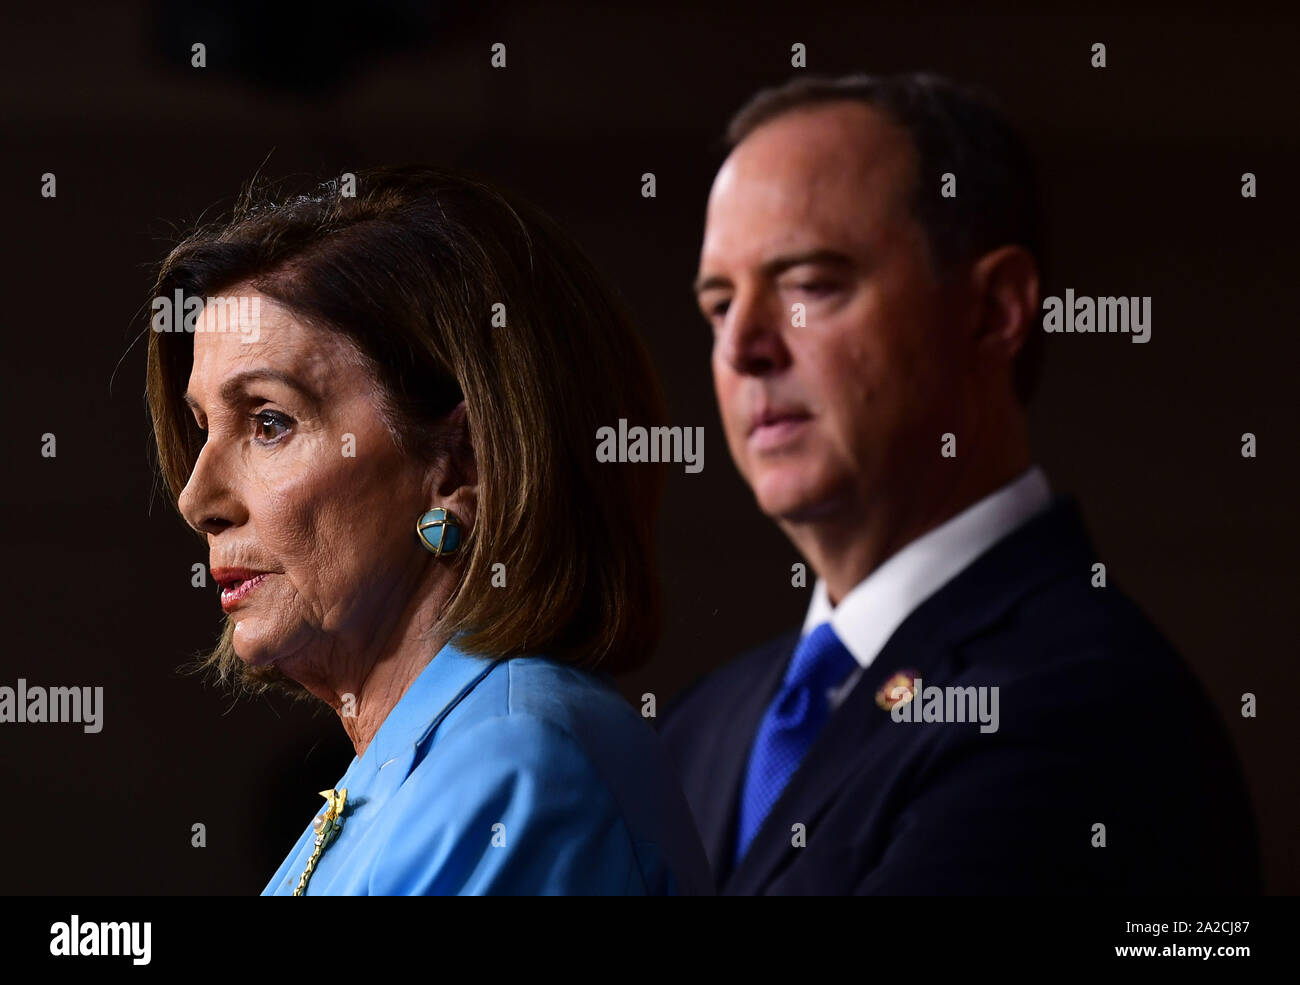 Washington, United States. 02nd Oct, 2019. Speaker of the House Nancy Pelosi, D-Calif., and House Intelligence Committee Chairman Adam Schiff, D-Calif., hold a press briefing on the impeachment proceedings into President Donald Trump, on Capitol Hill in Washington, DC on Wednesday, October 2, 2019. Photo by Kevin Dietsch/UPI Credit: UPI/Alamy Live News Stock Photo